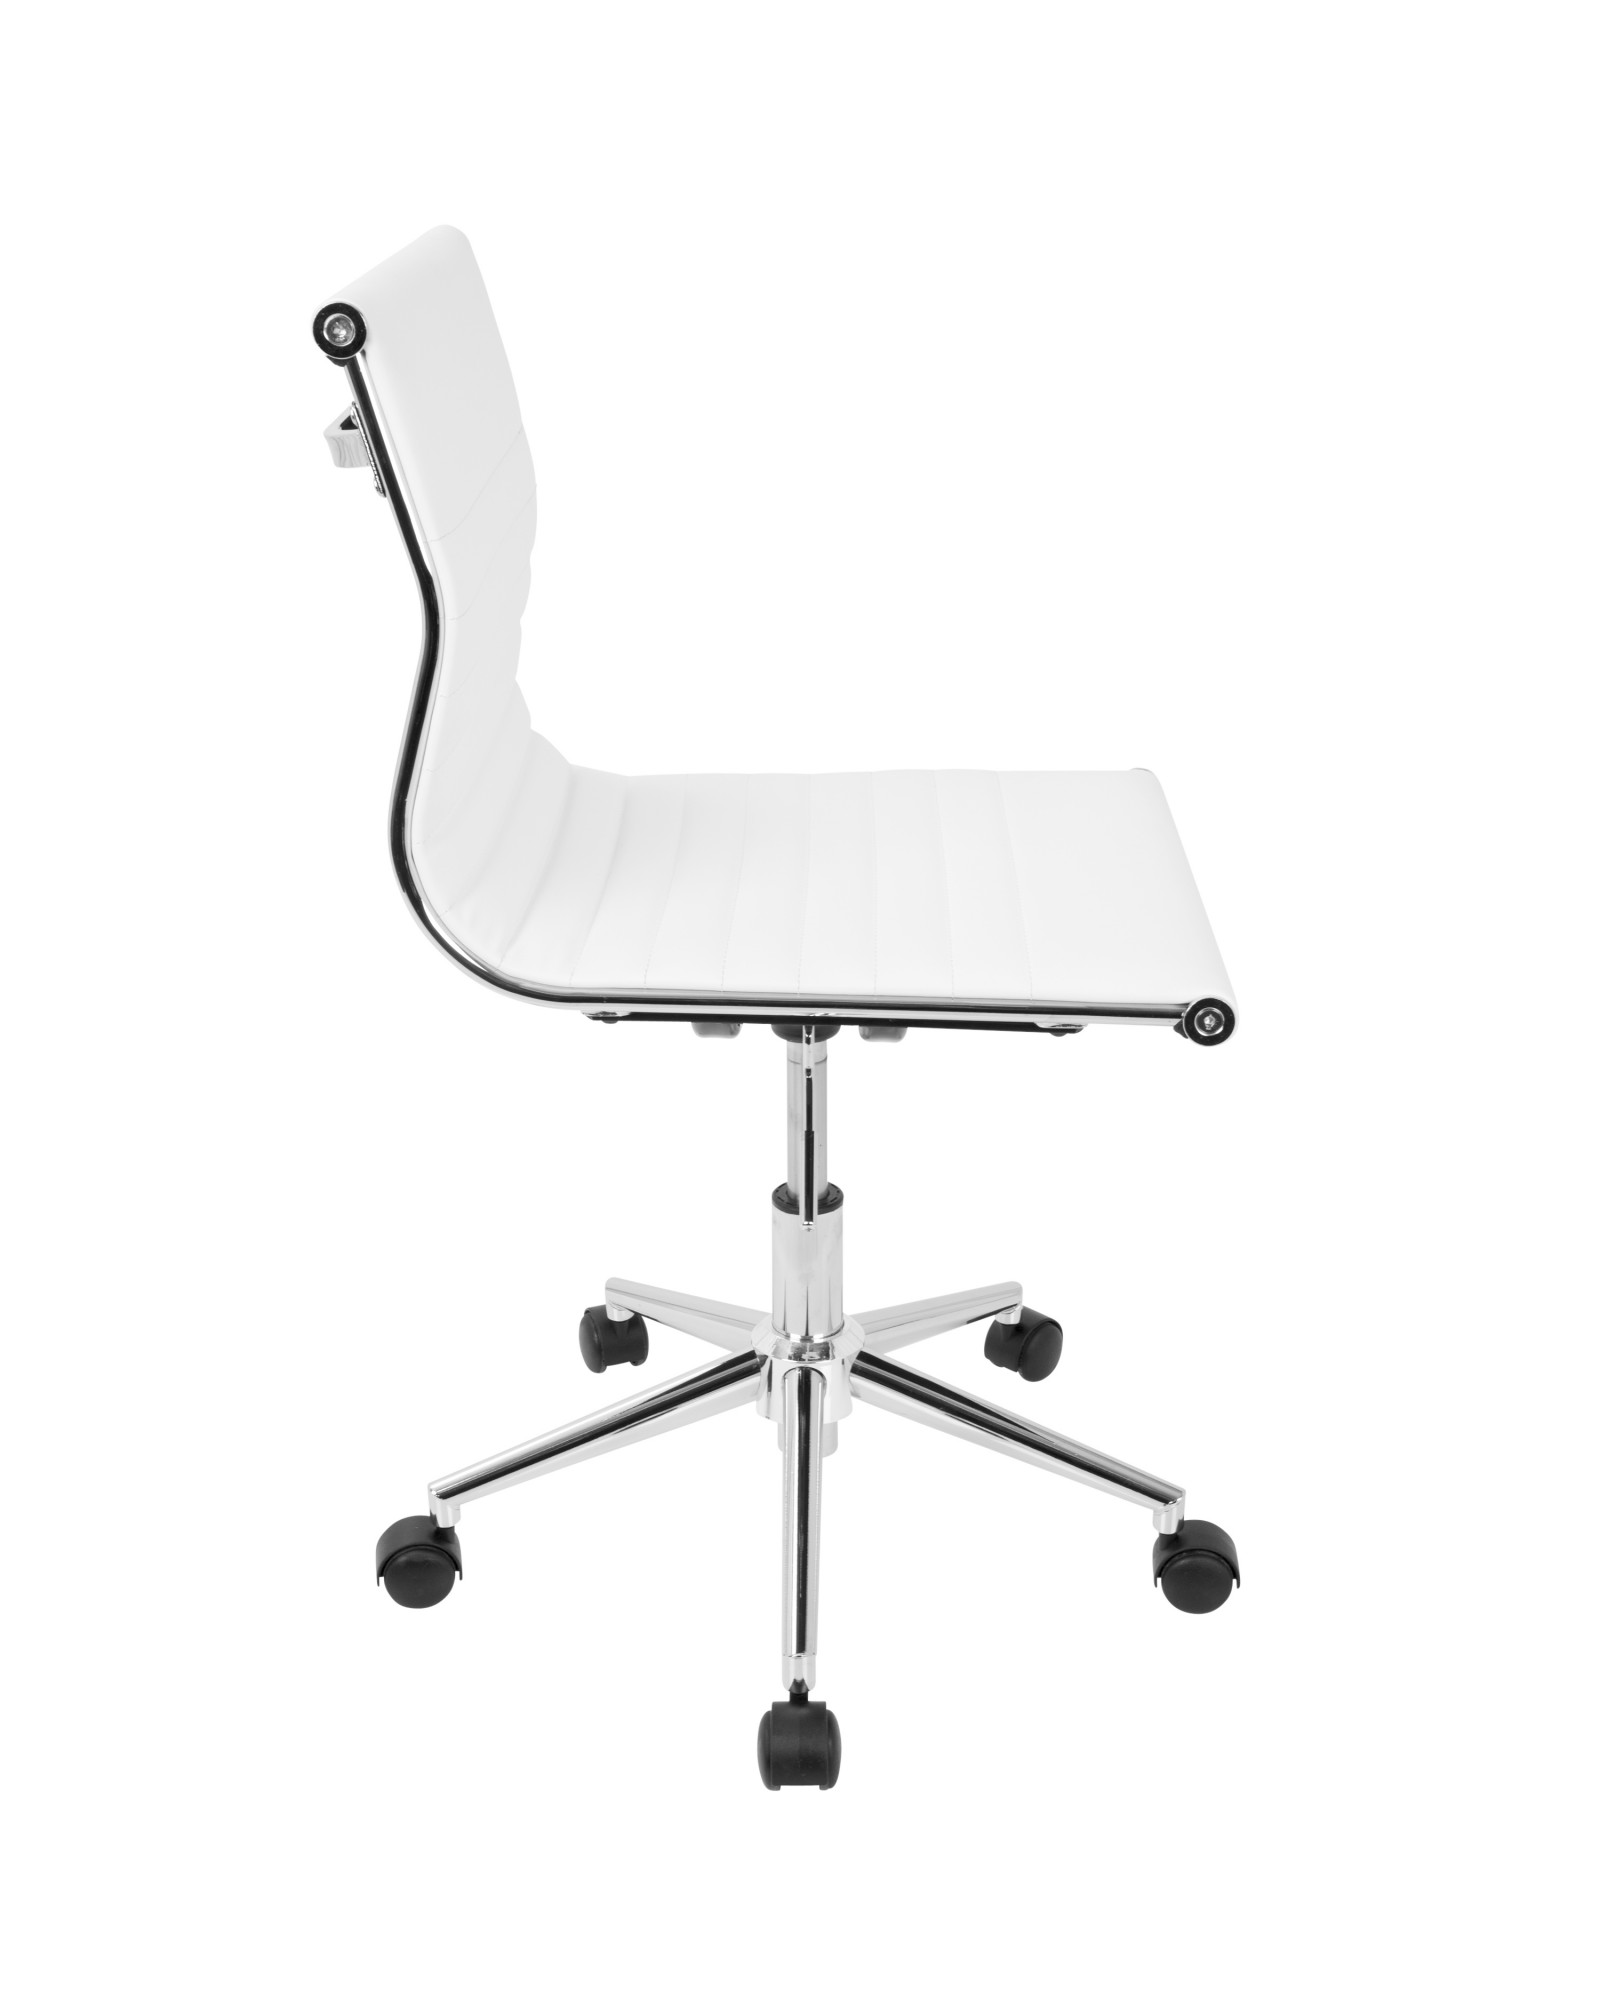 Master Contemporary Armless Adjustable Task Chair in White Faux Leather